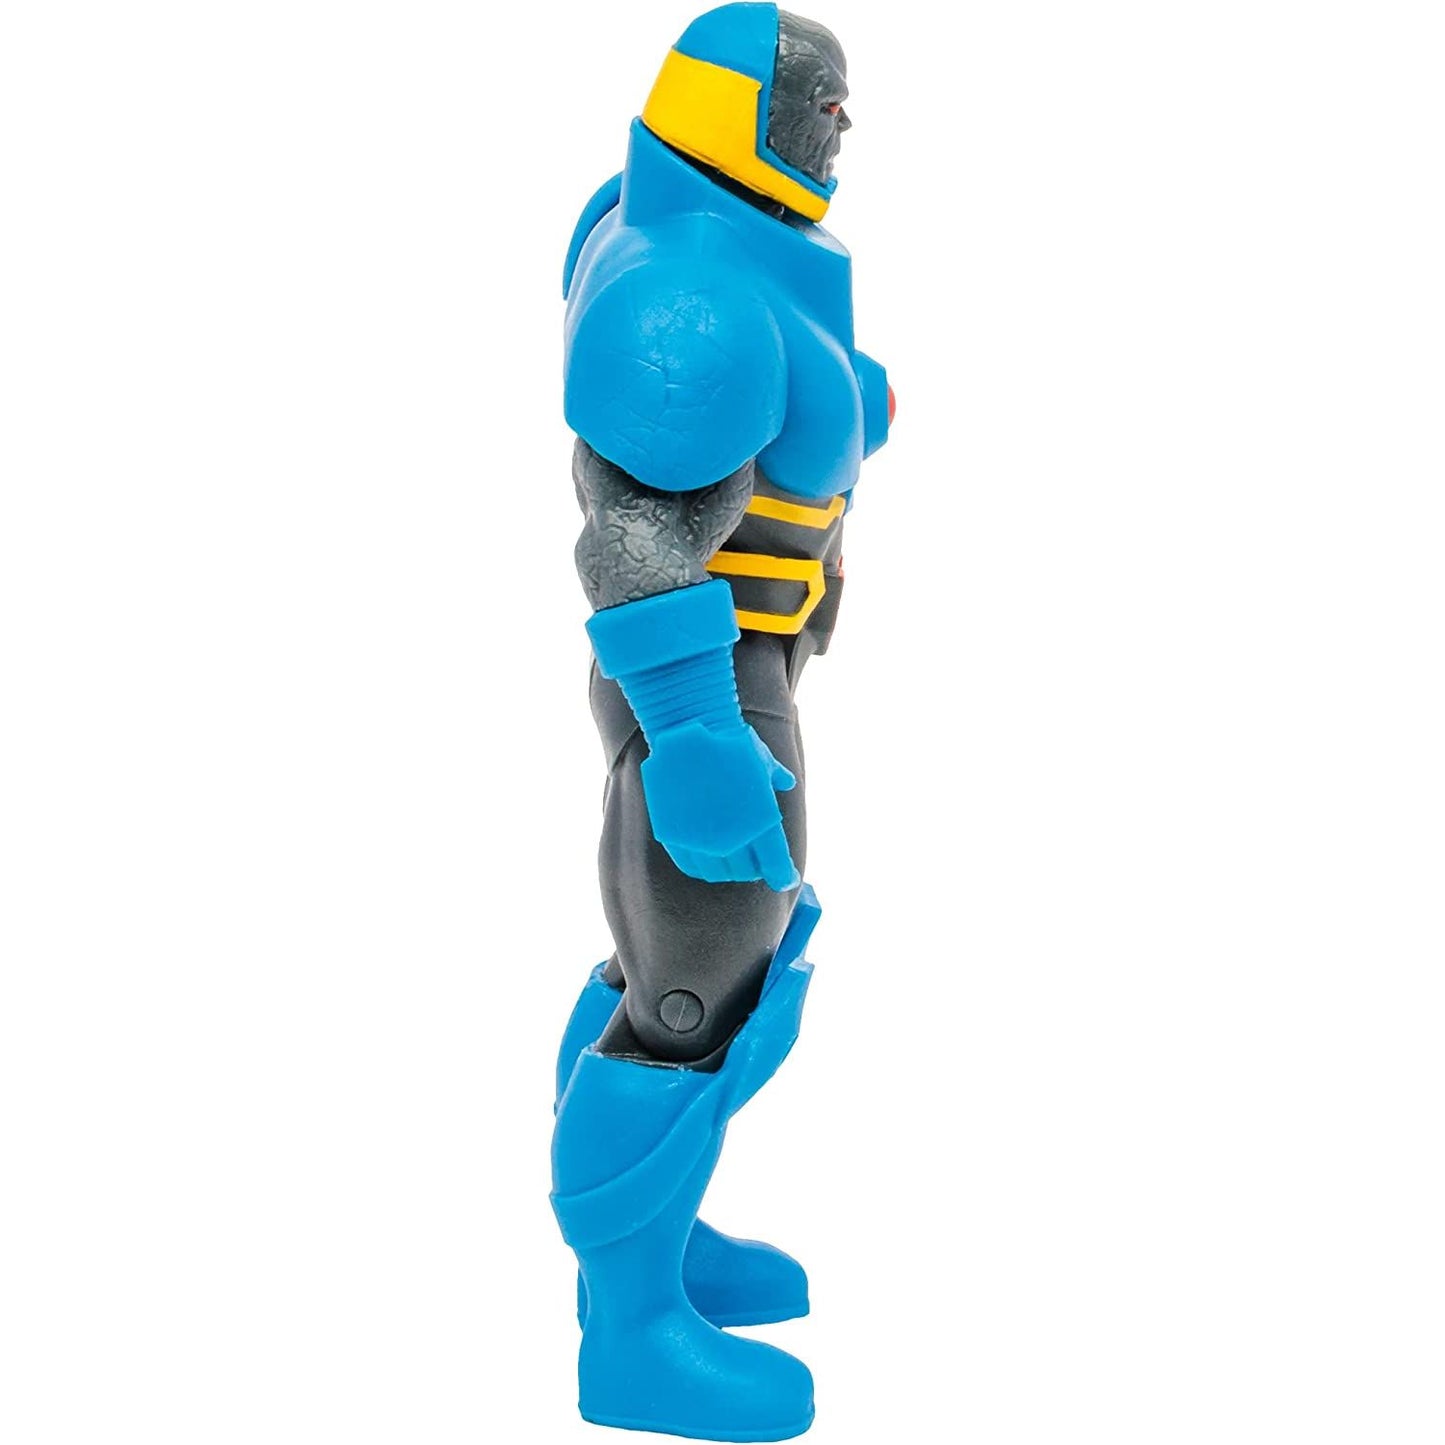 DC Direct - Super Powers - Darkseid Action Figure Toy side pose - Heretoserveyou